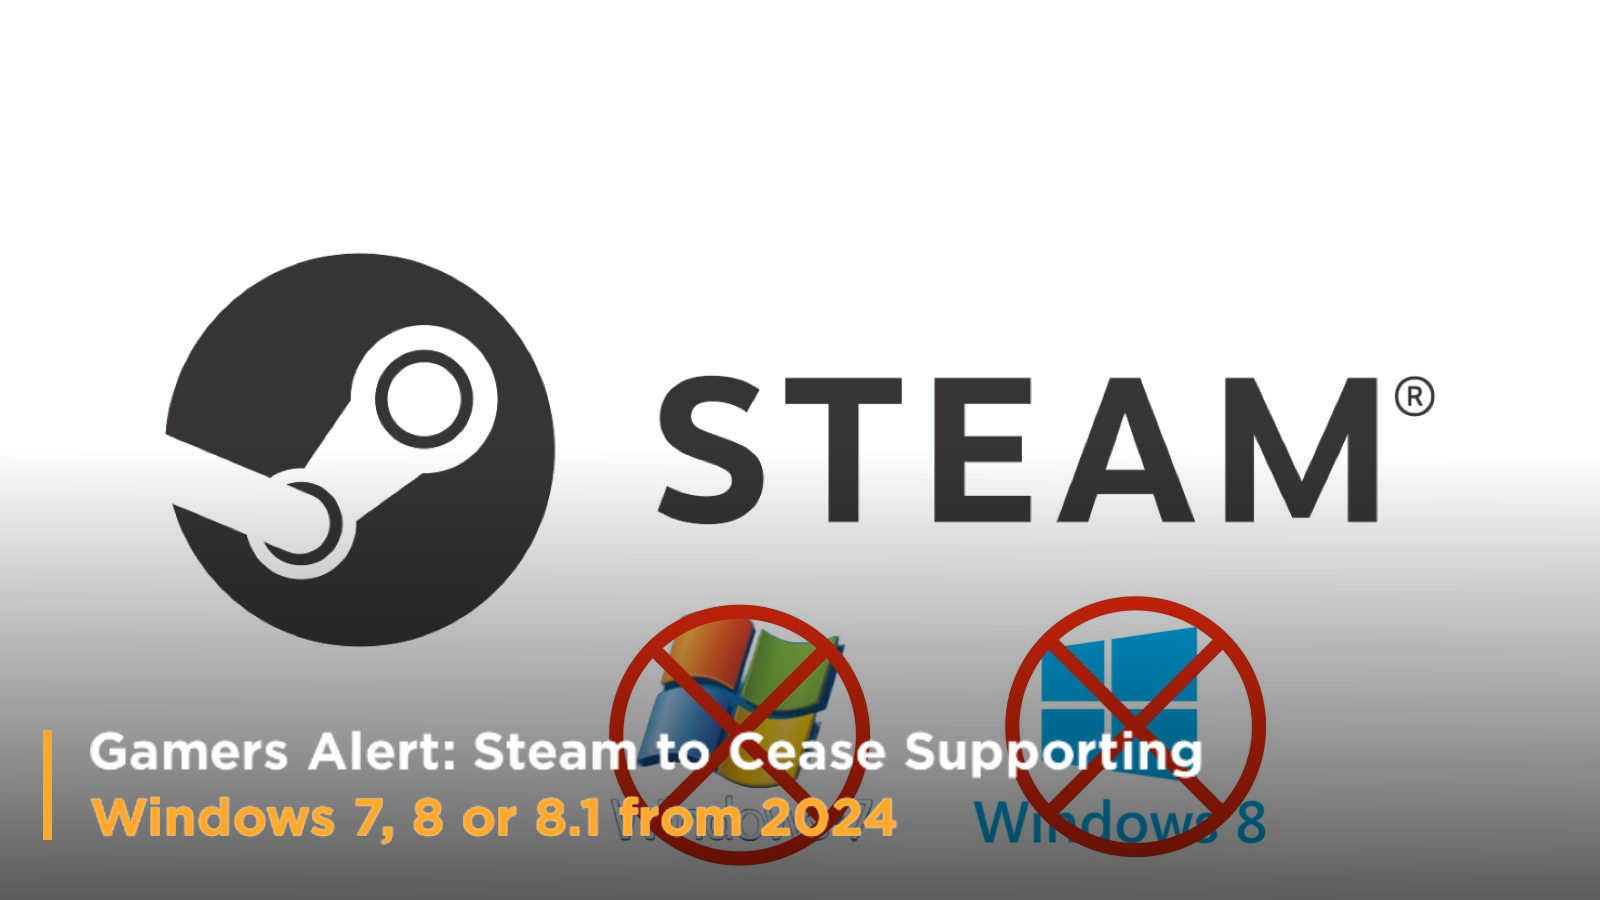 Gamers Alert: Steam to Cease Supporting Windows 7, 8 or 8.1 from 2024